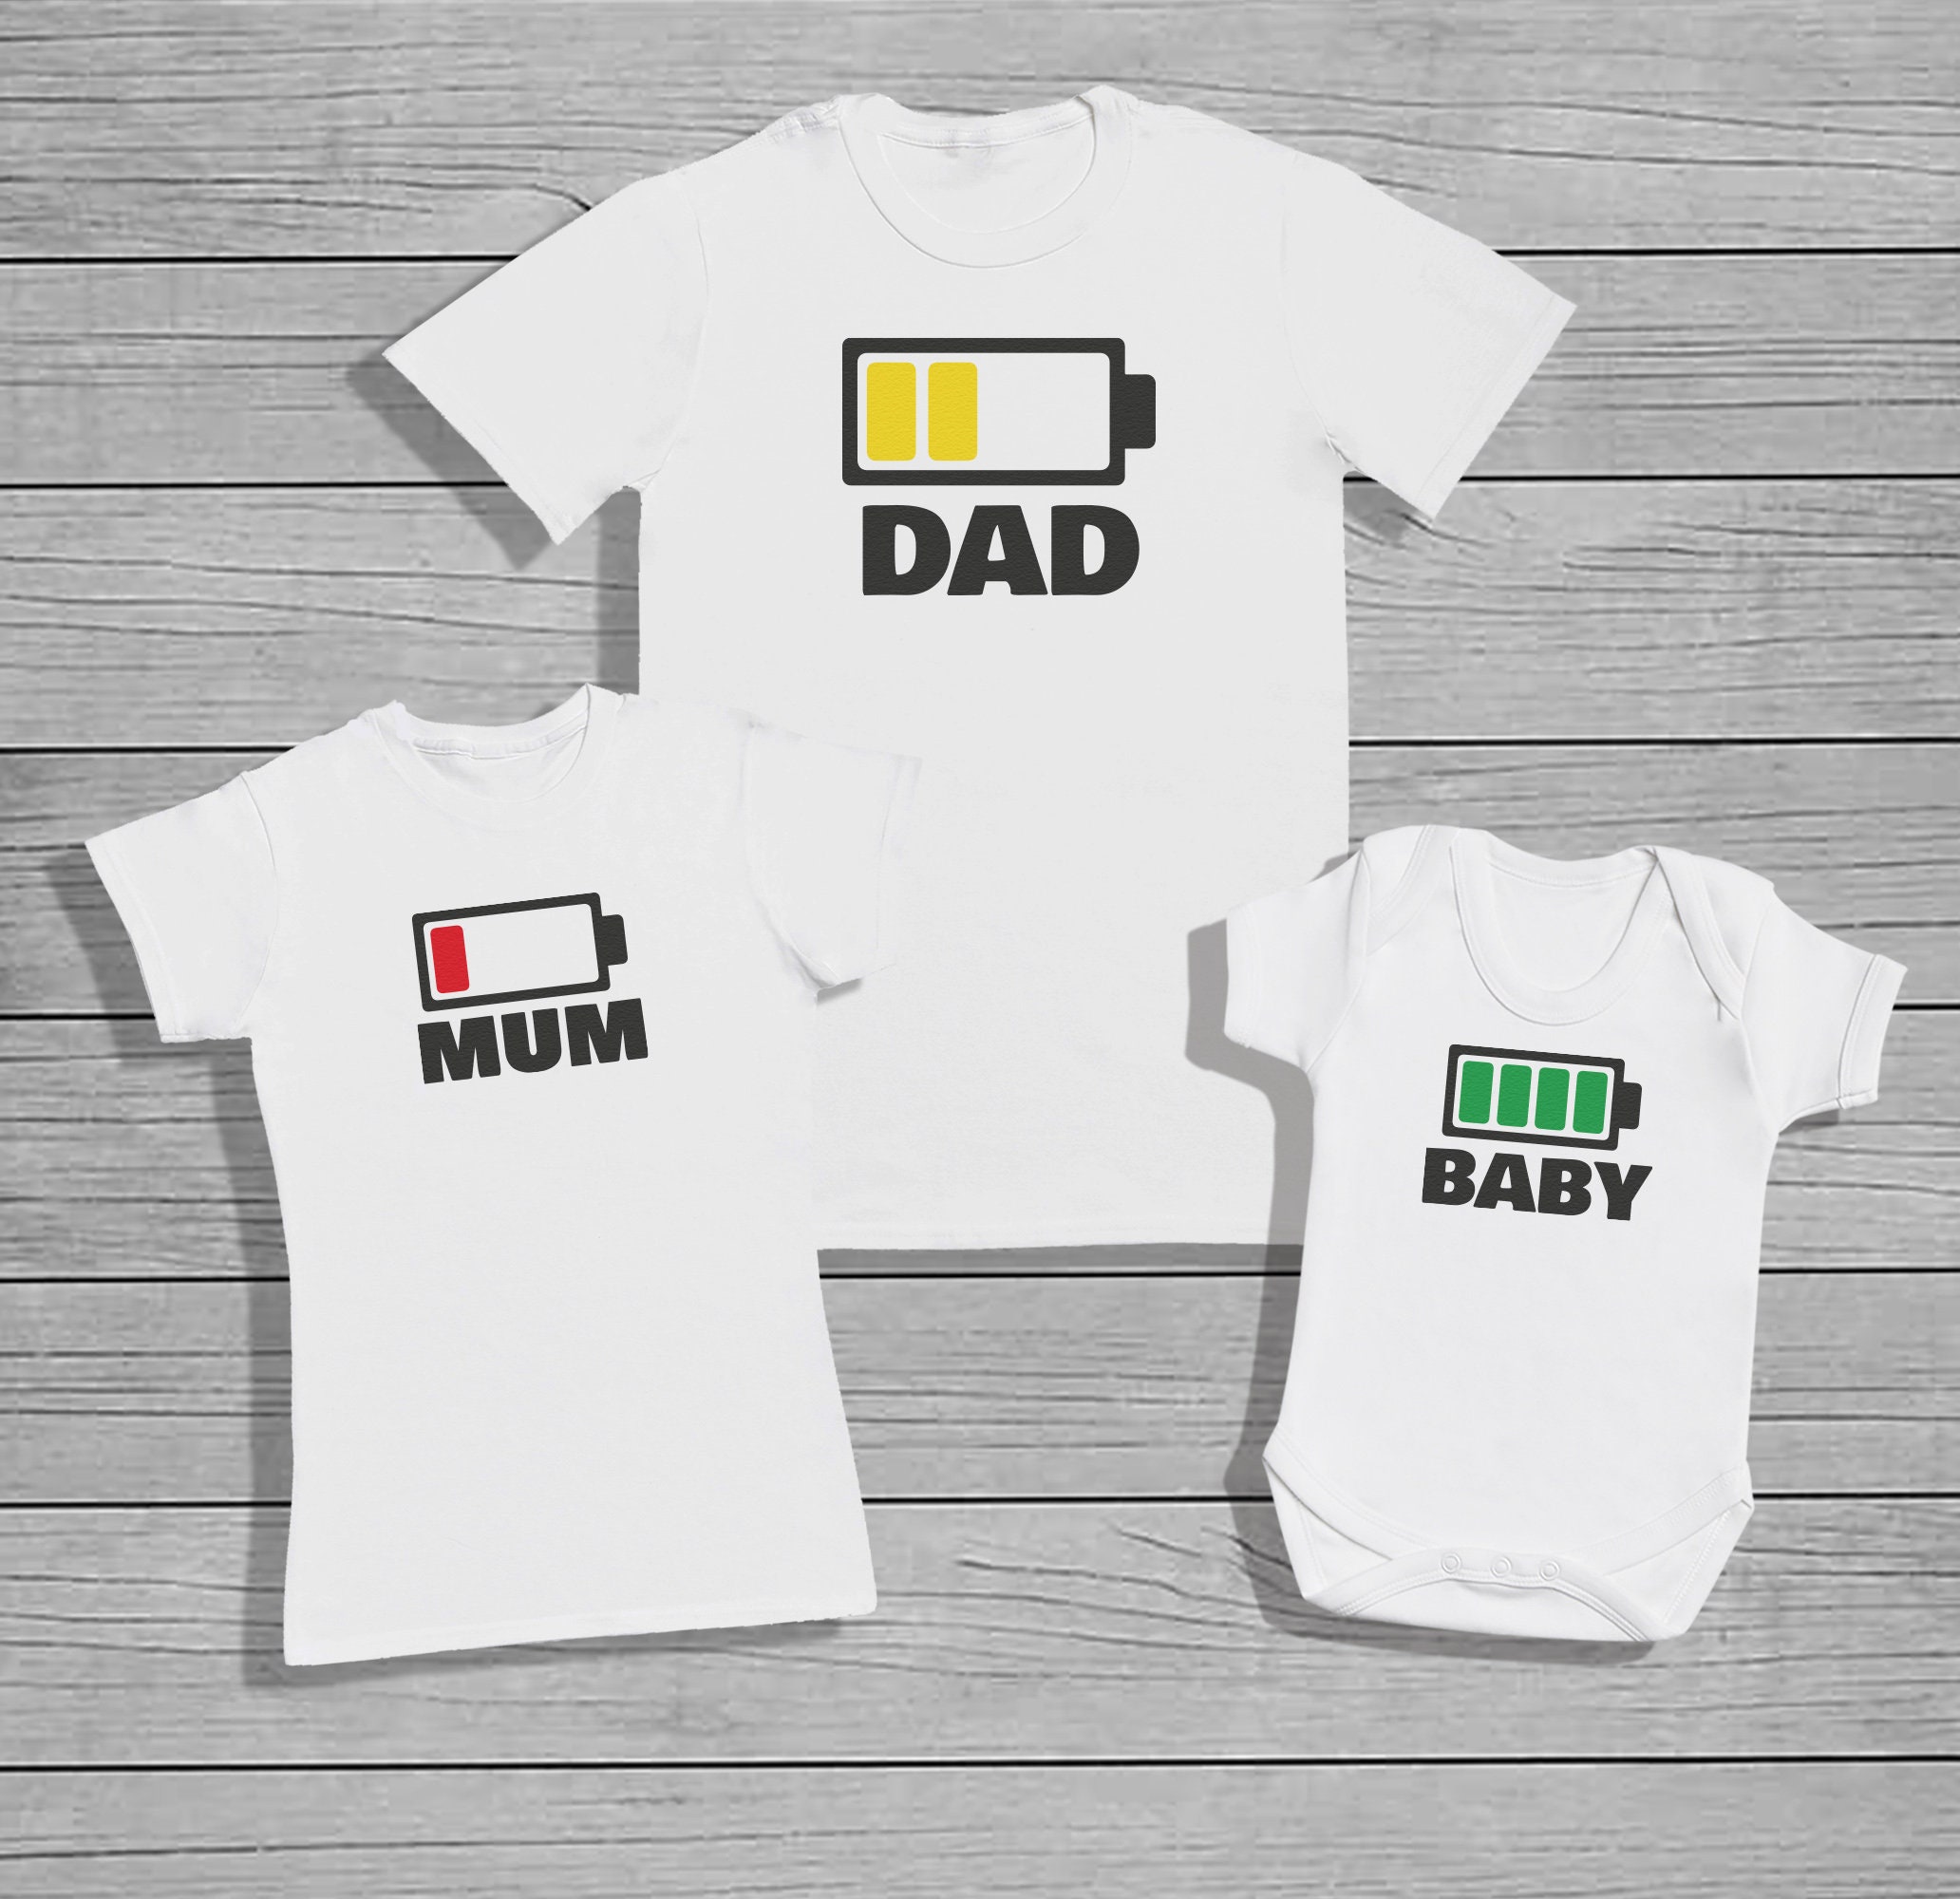 NEW Full Low NO Battery Matching Family Adult and Kids T-shirts Baby Newborn-5X 